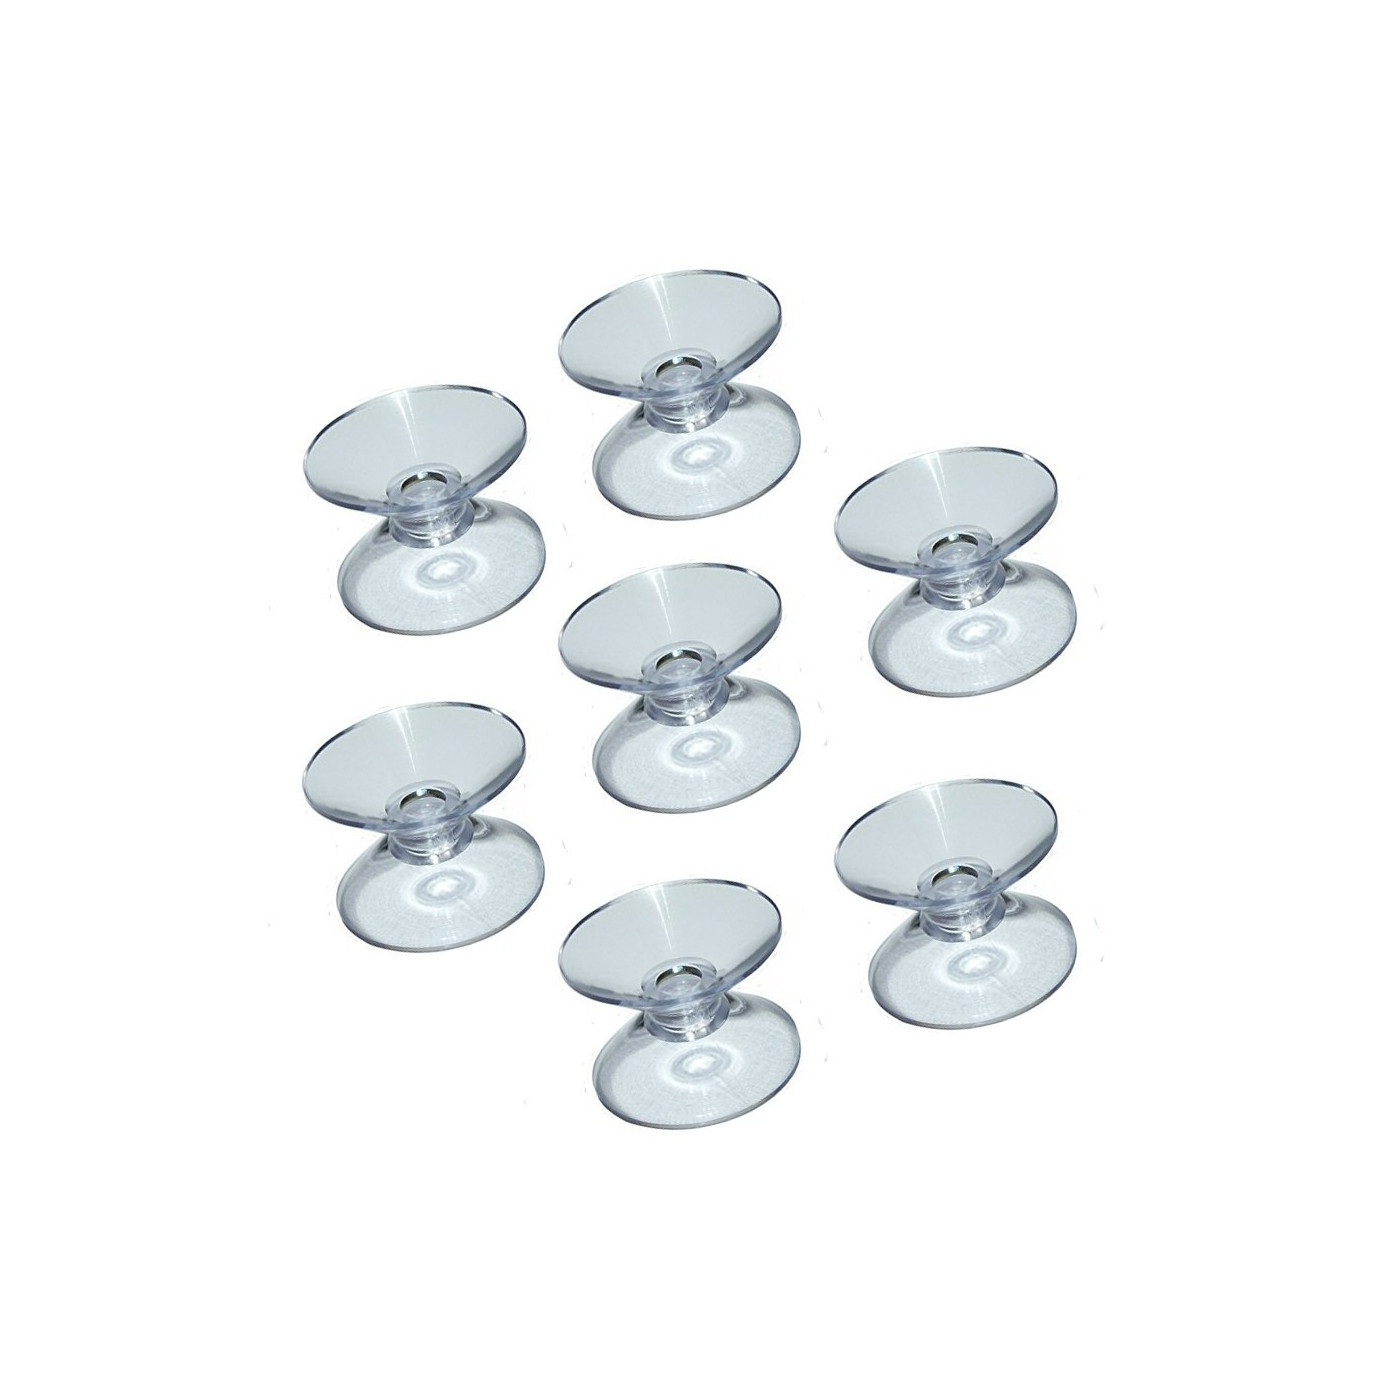 Set of 60 pvc suction cups double (30 mm)